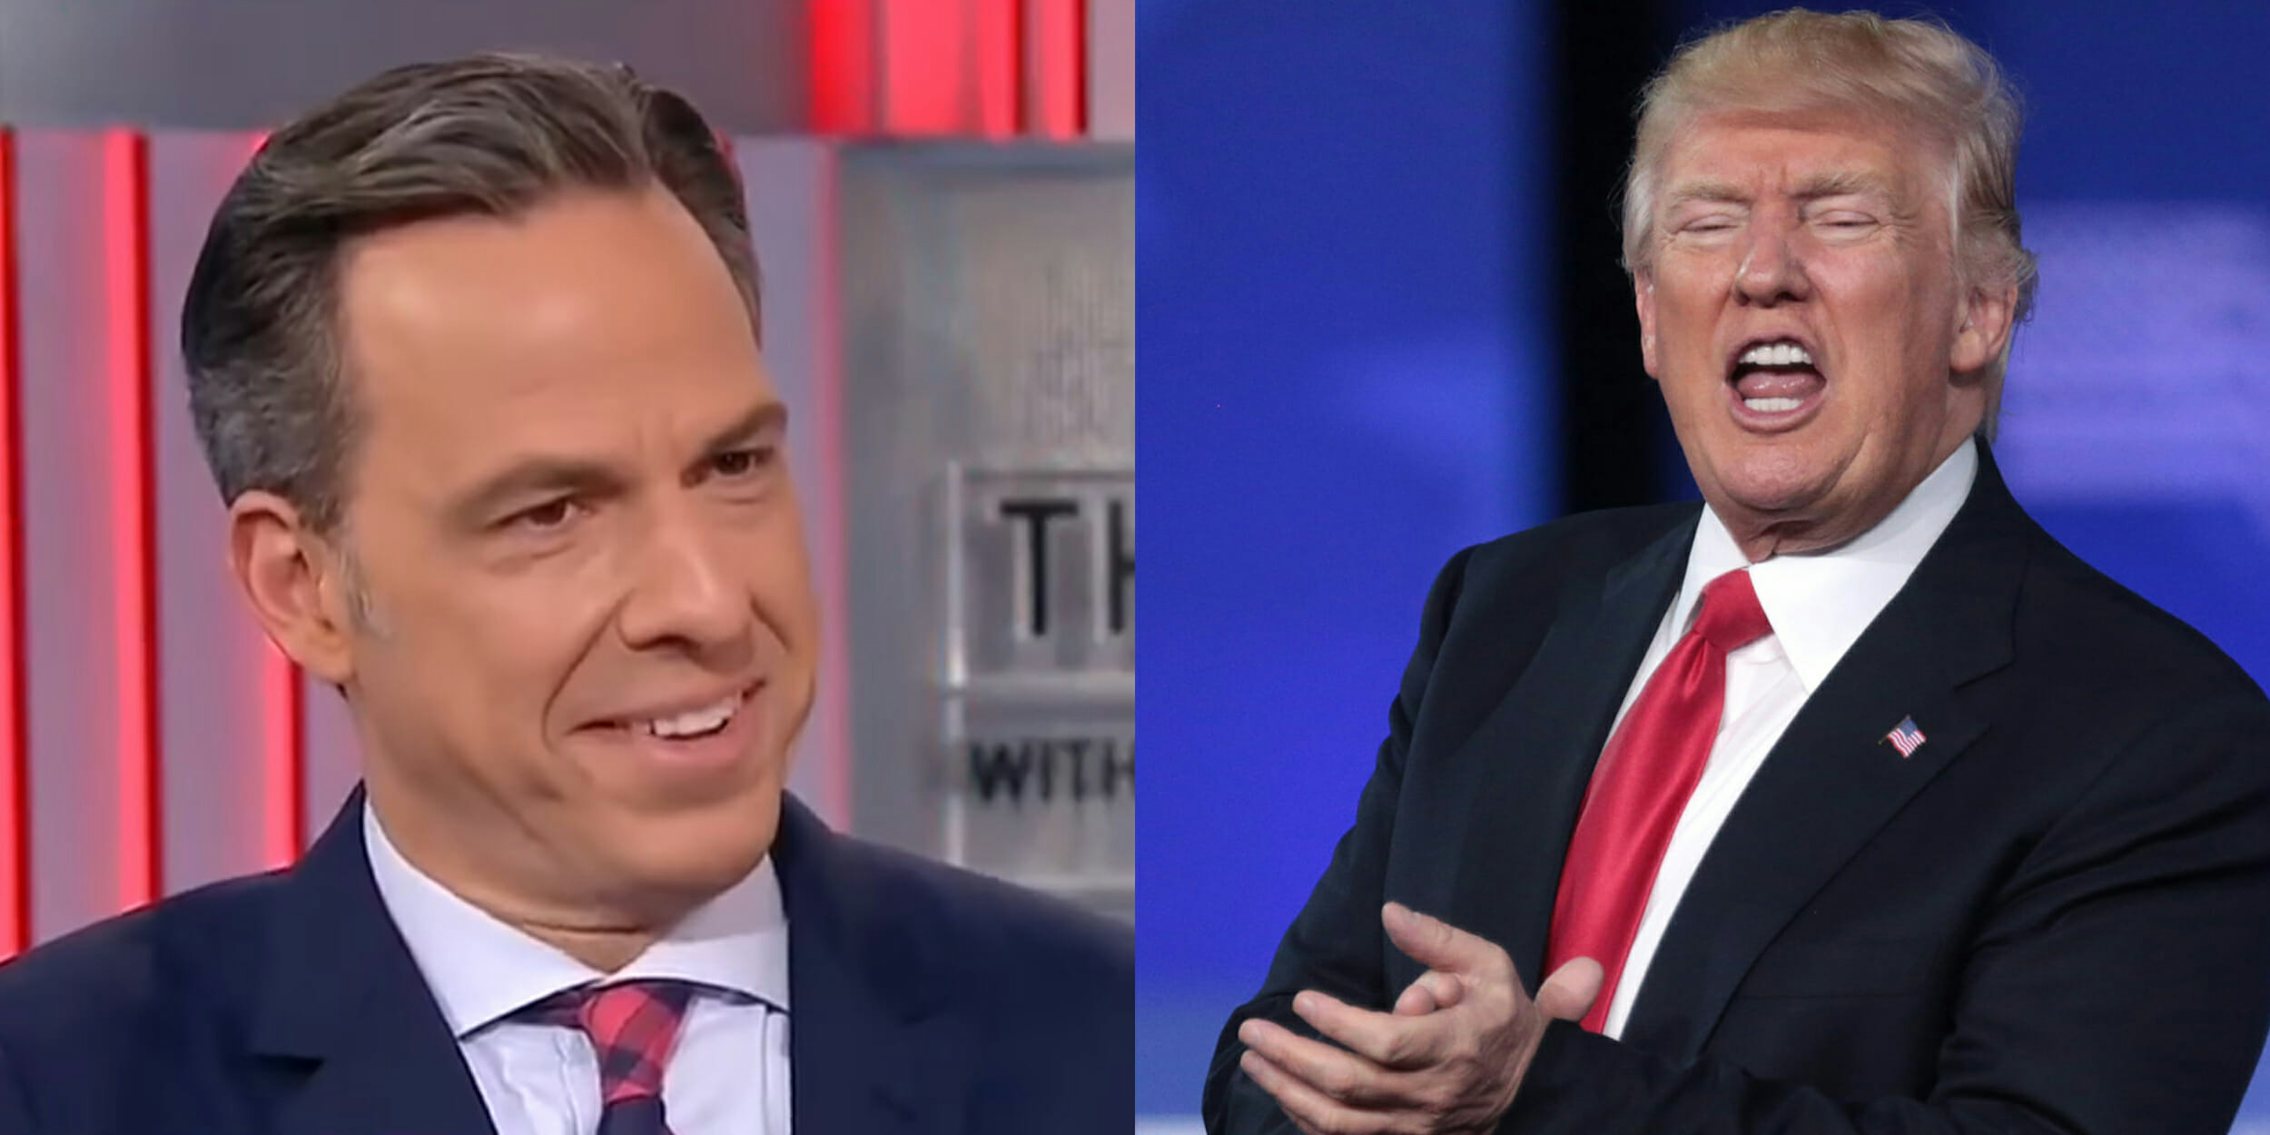 Jake Tapper trolled Donald Trump hard after his sexist Morning Joe tweets